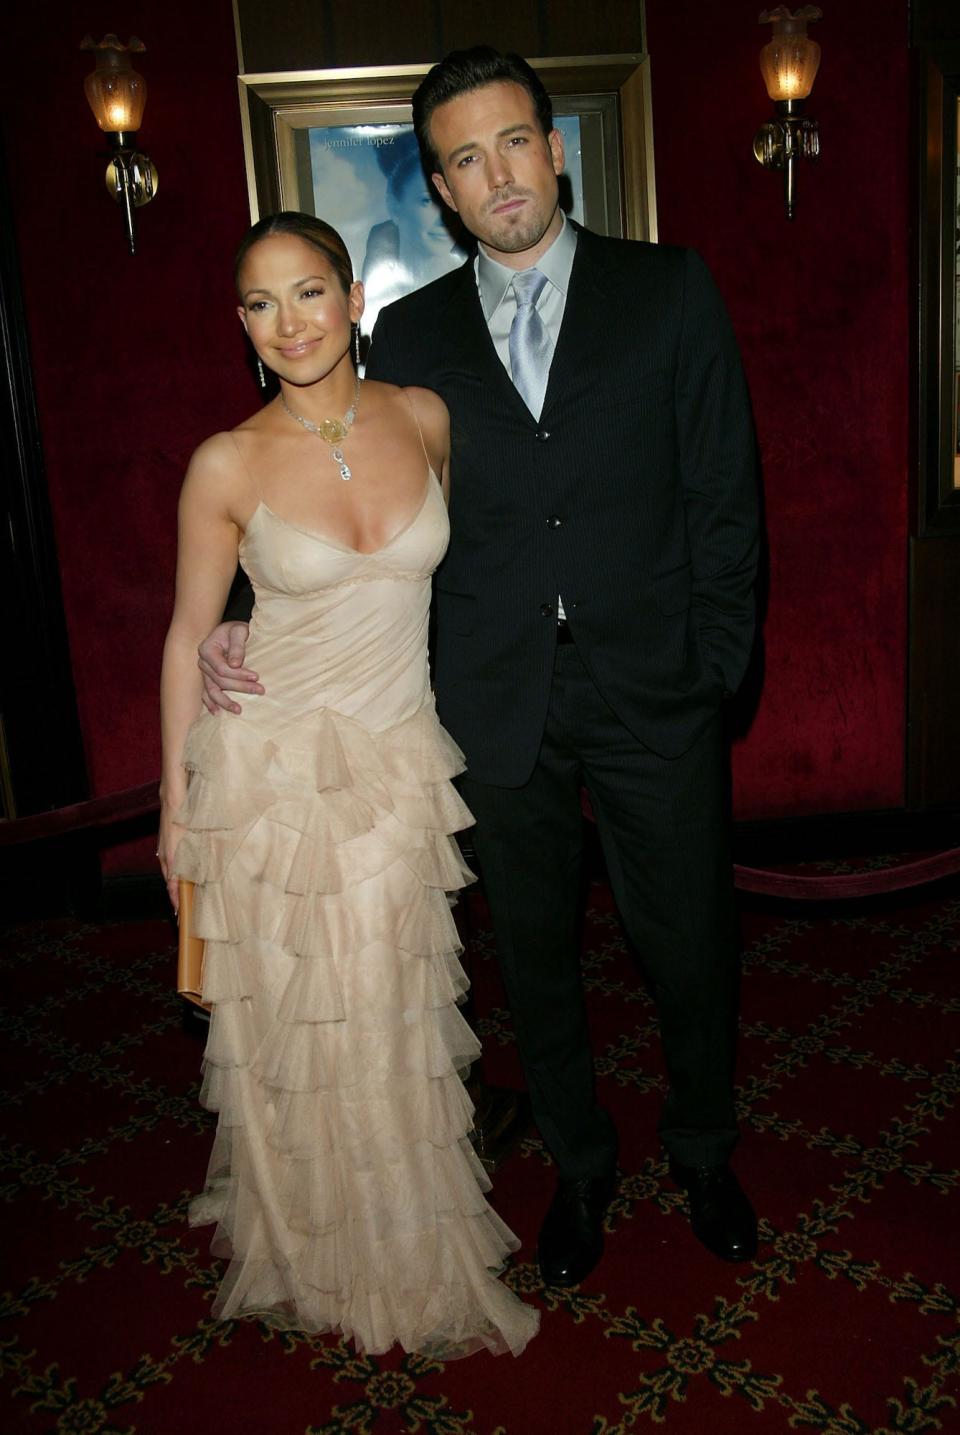 Jennifer Lopez and Ben Affleck at the "Maid in Manhattan" premiere on December 8, 2002.